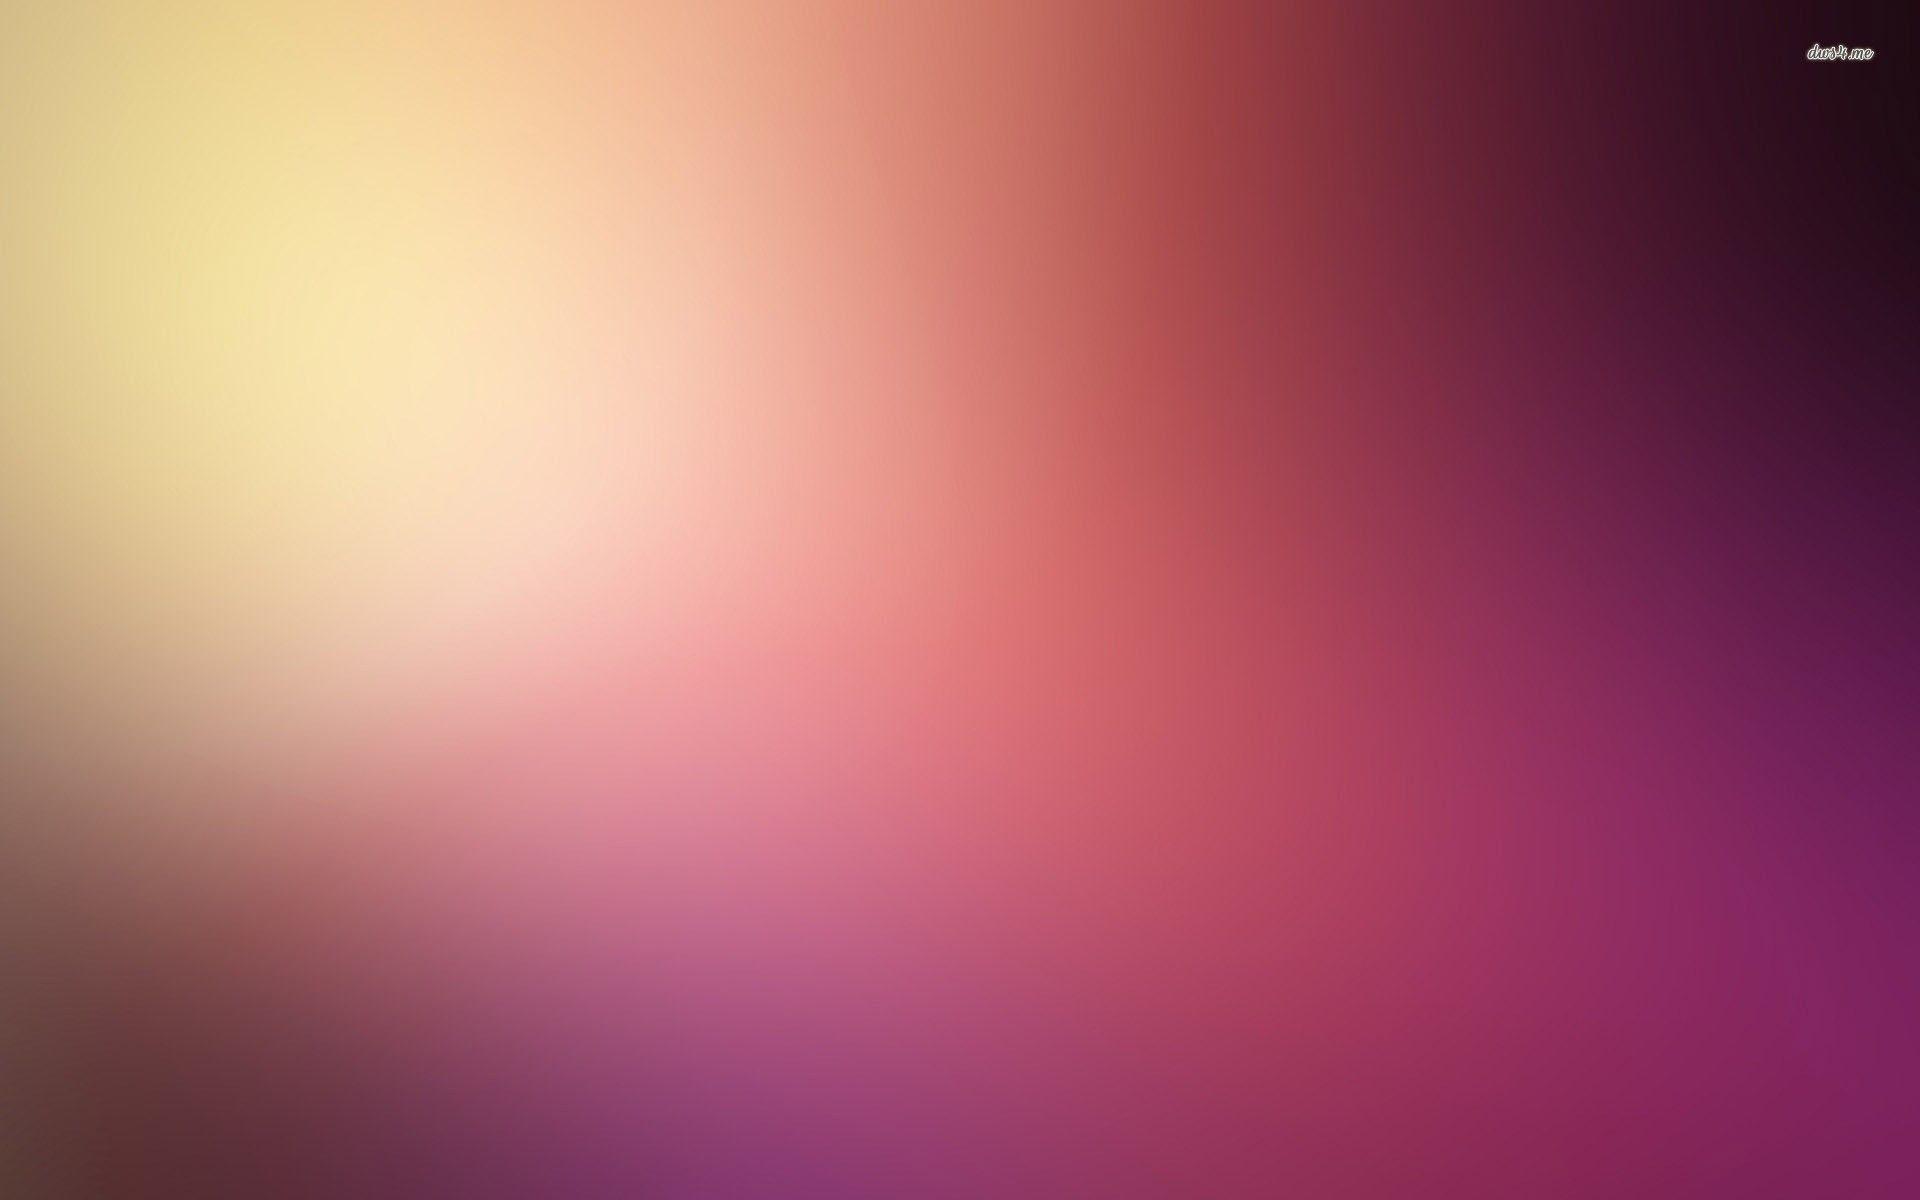 CSS Gradient  Generator Maker and Background